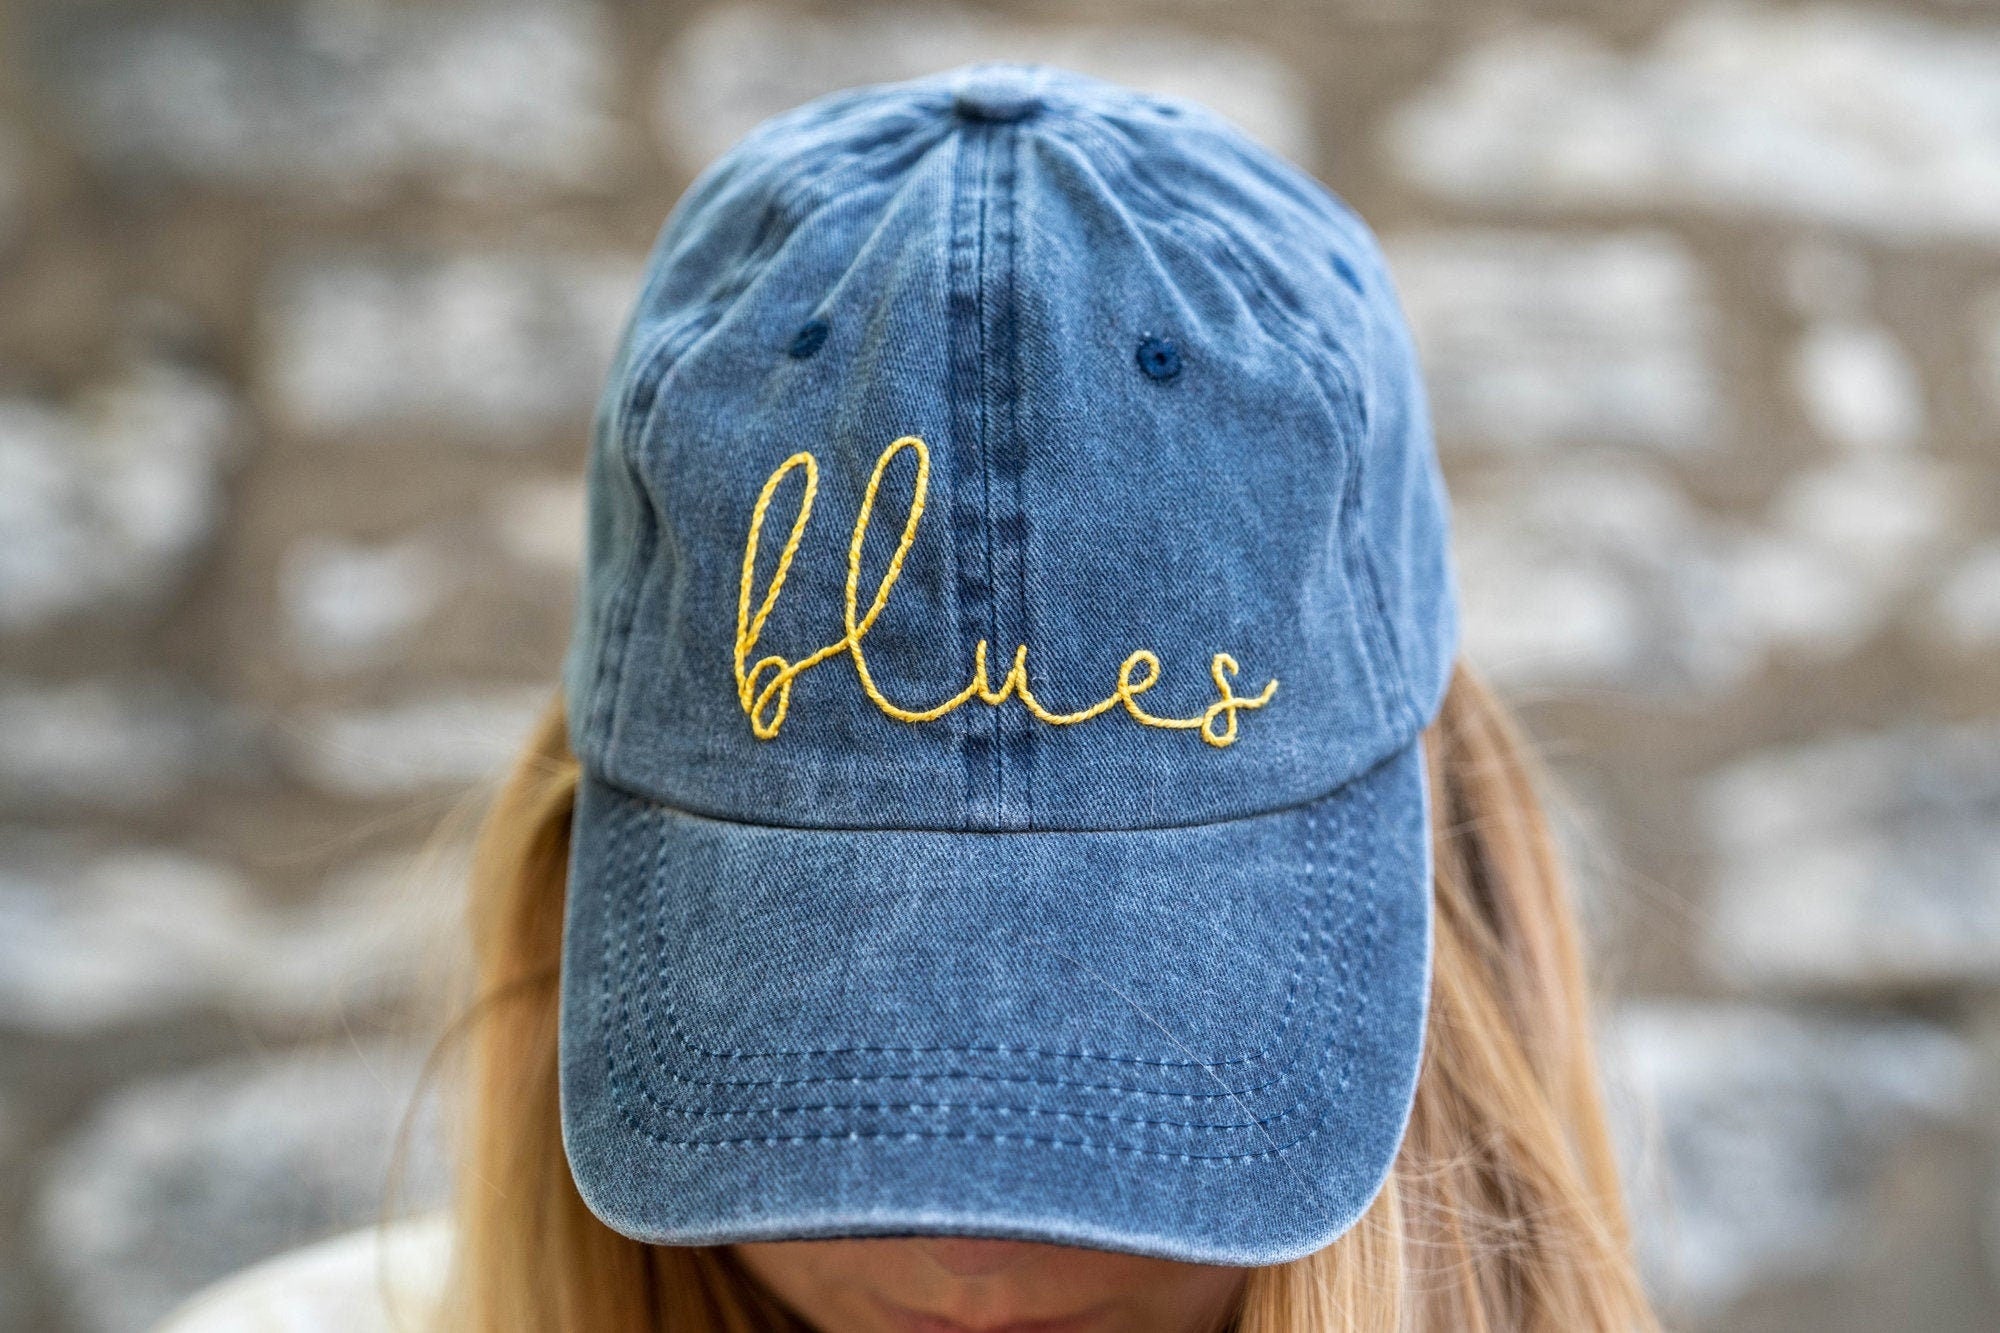 STL Blues Hand Embroidered Dad Hat